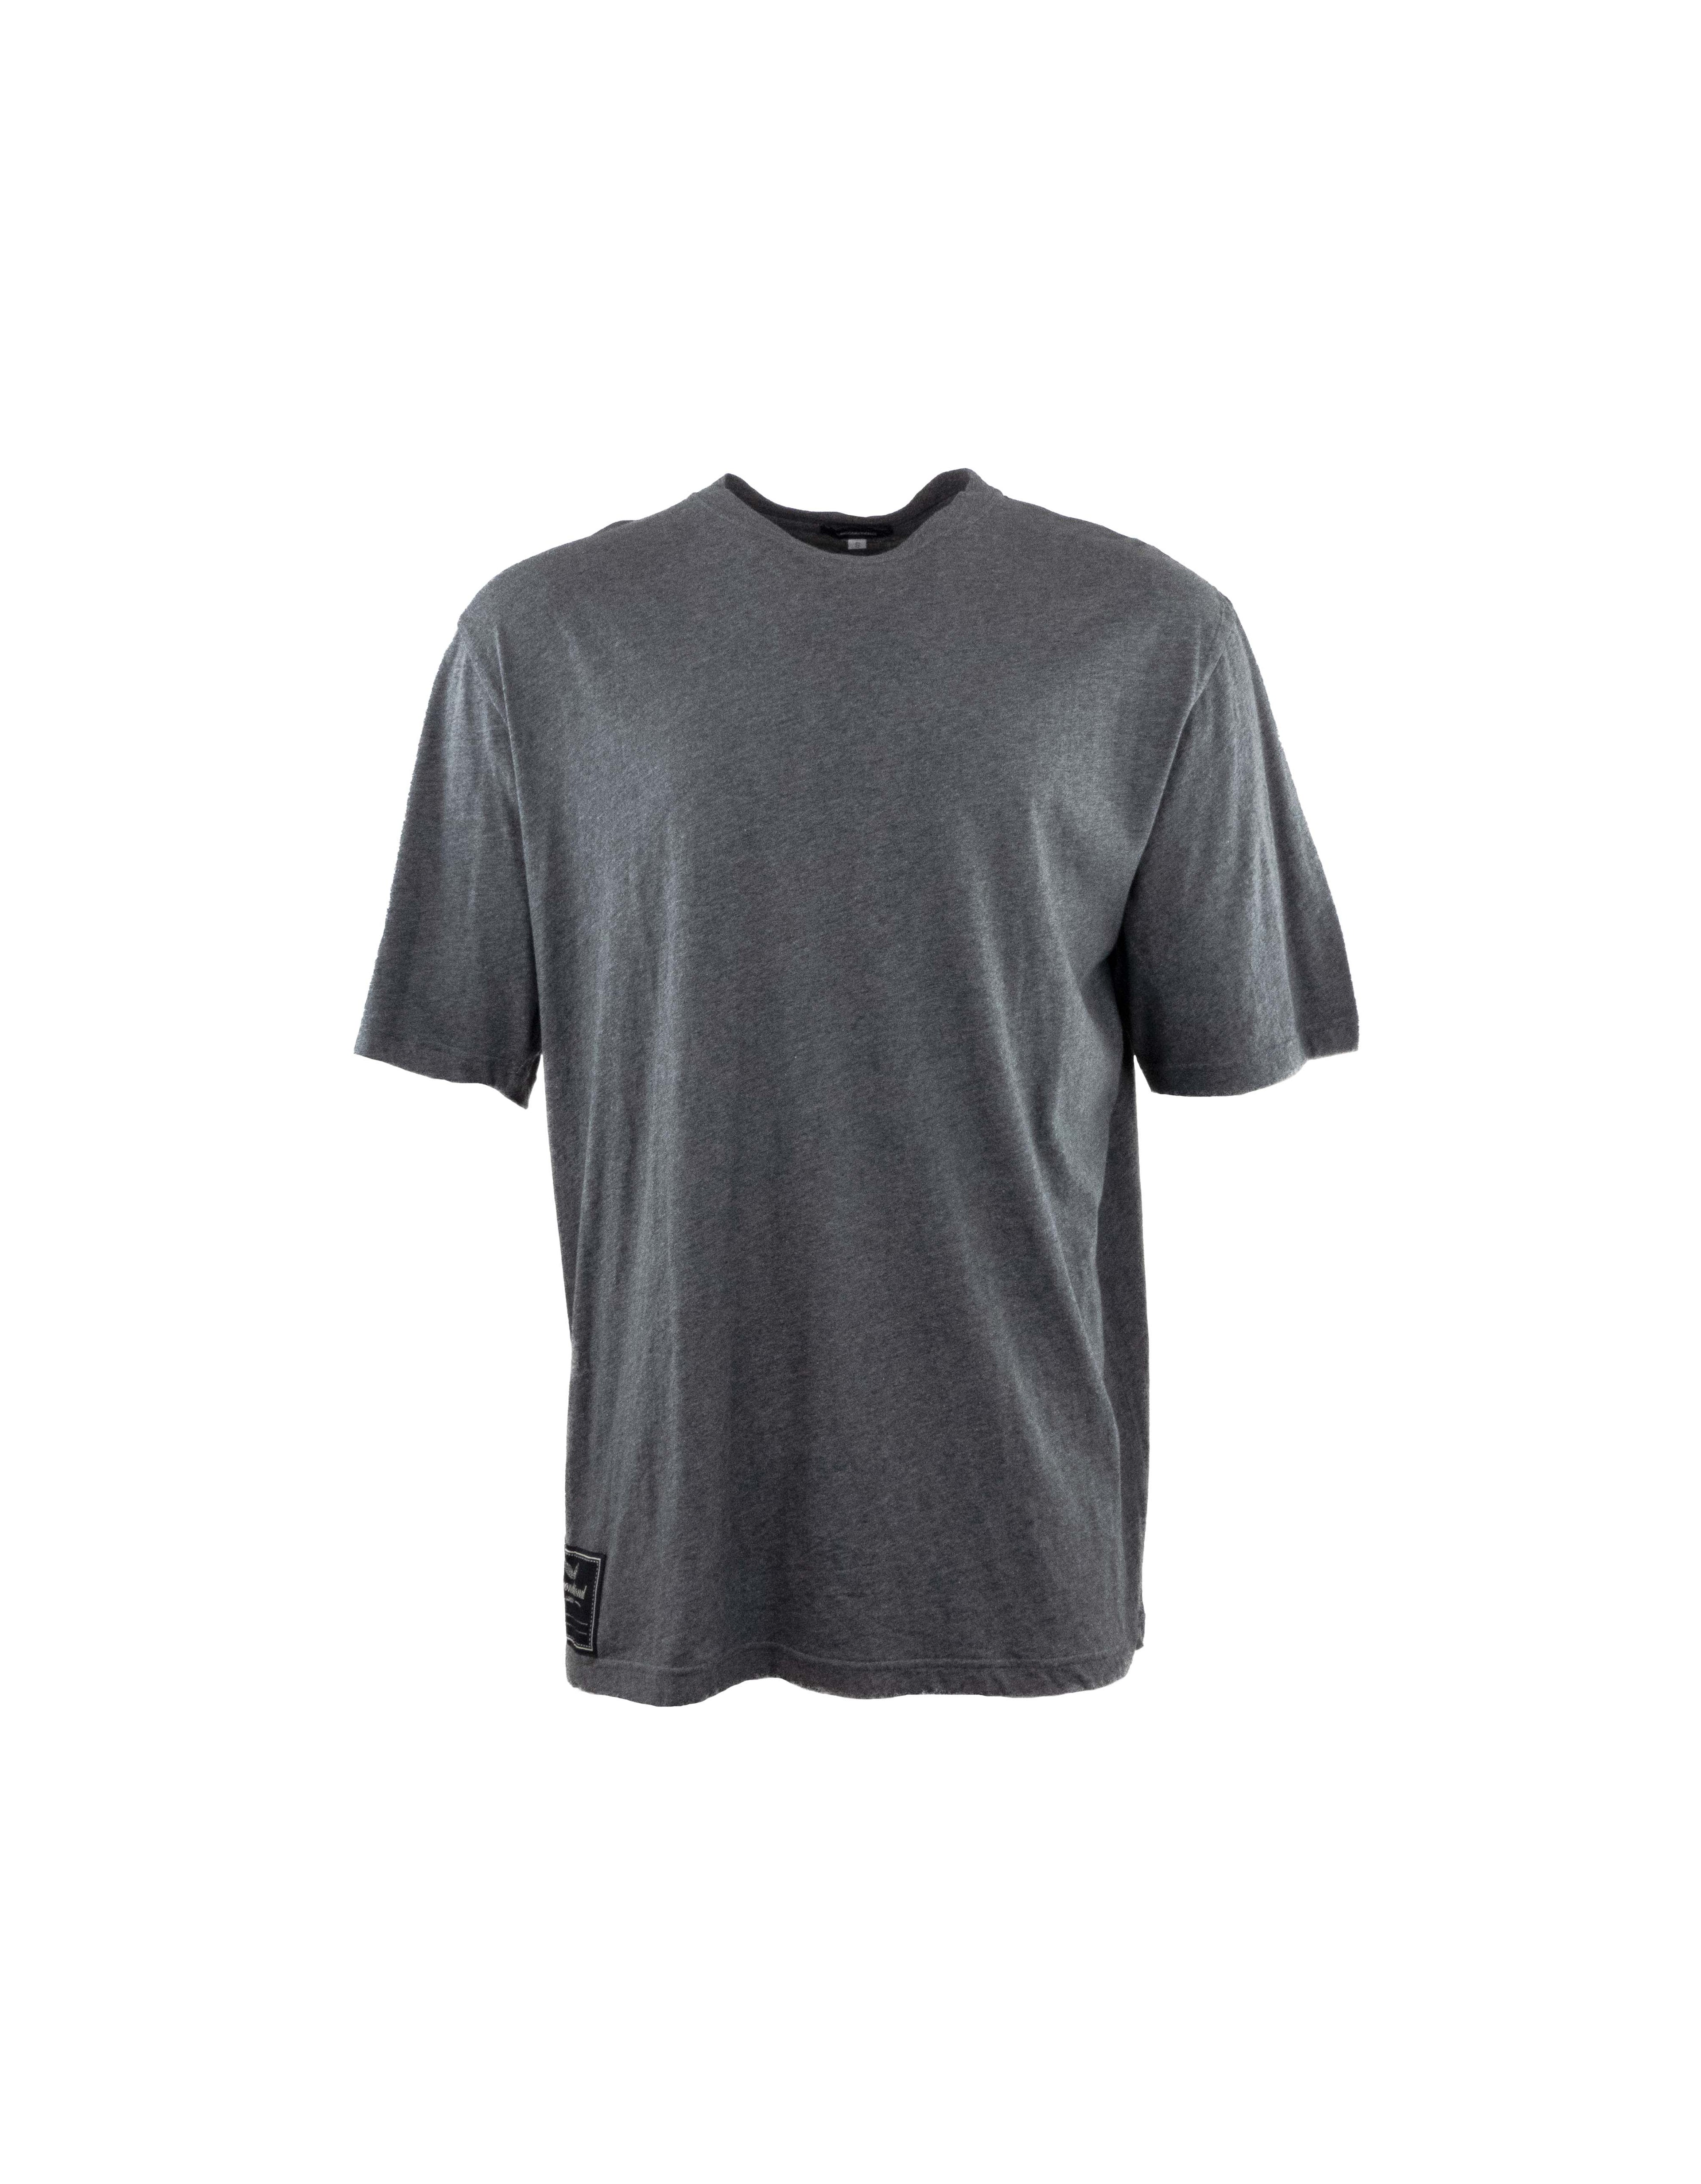 GREY UNCON PATCH OVERSIZED T-SHIRT